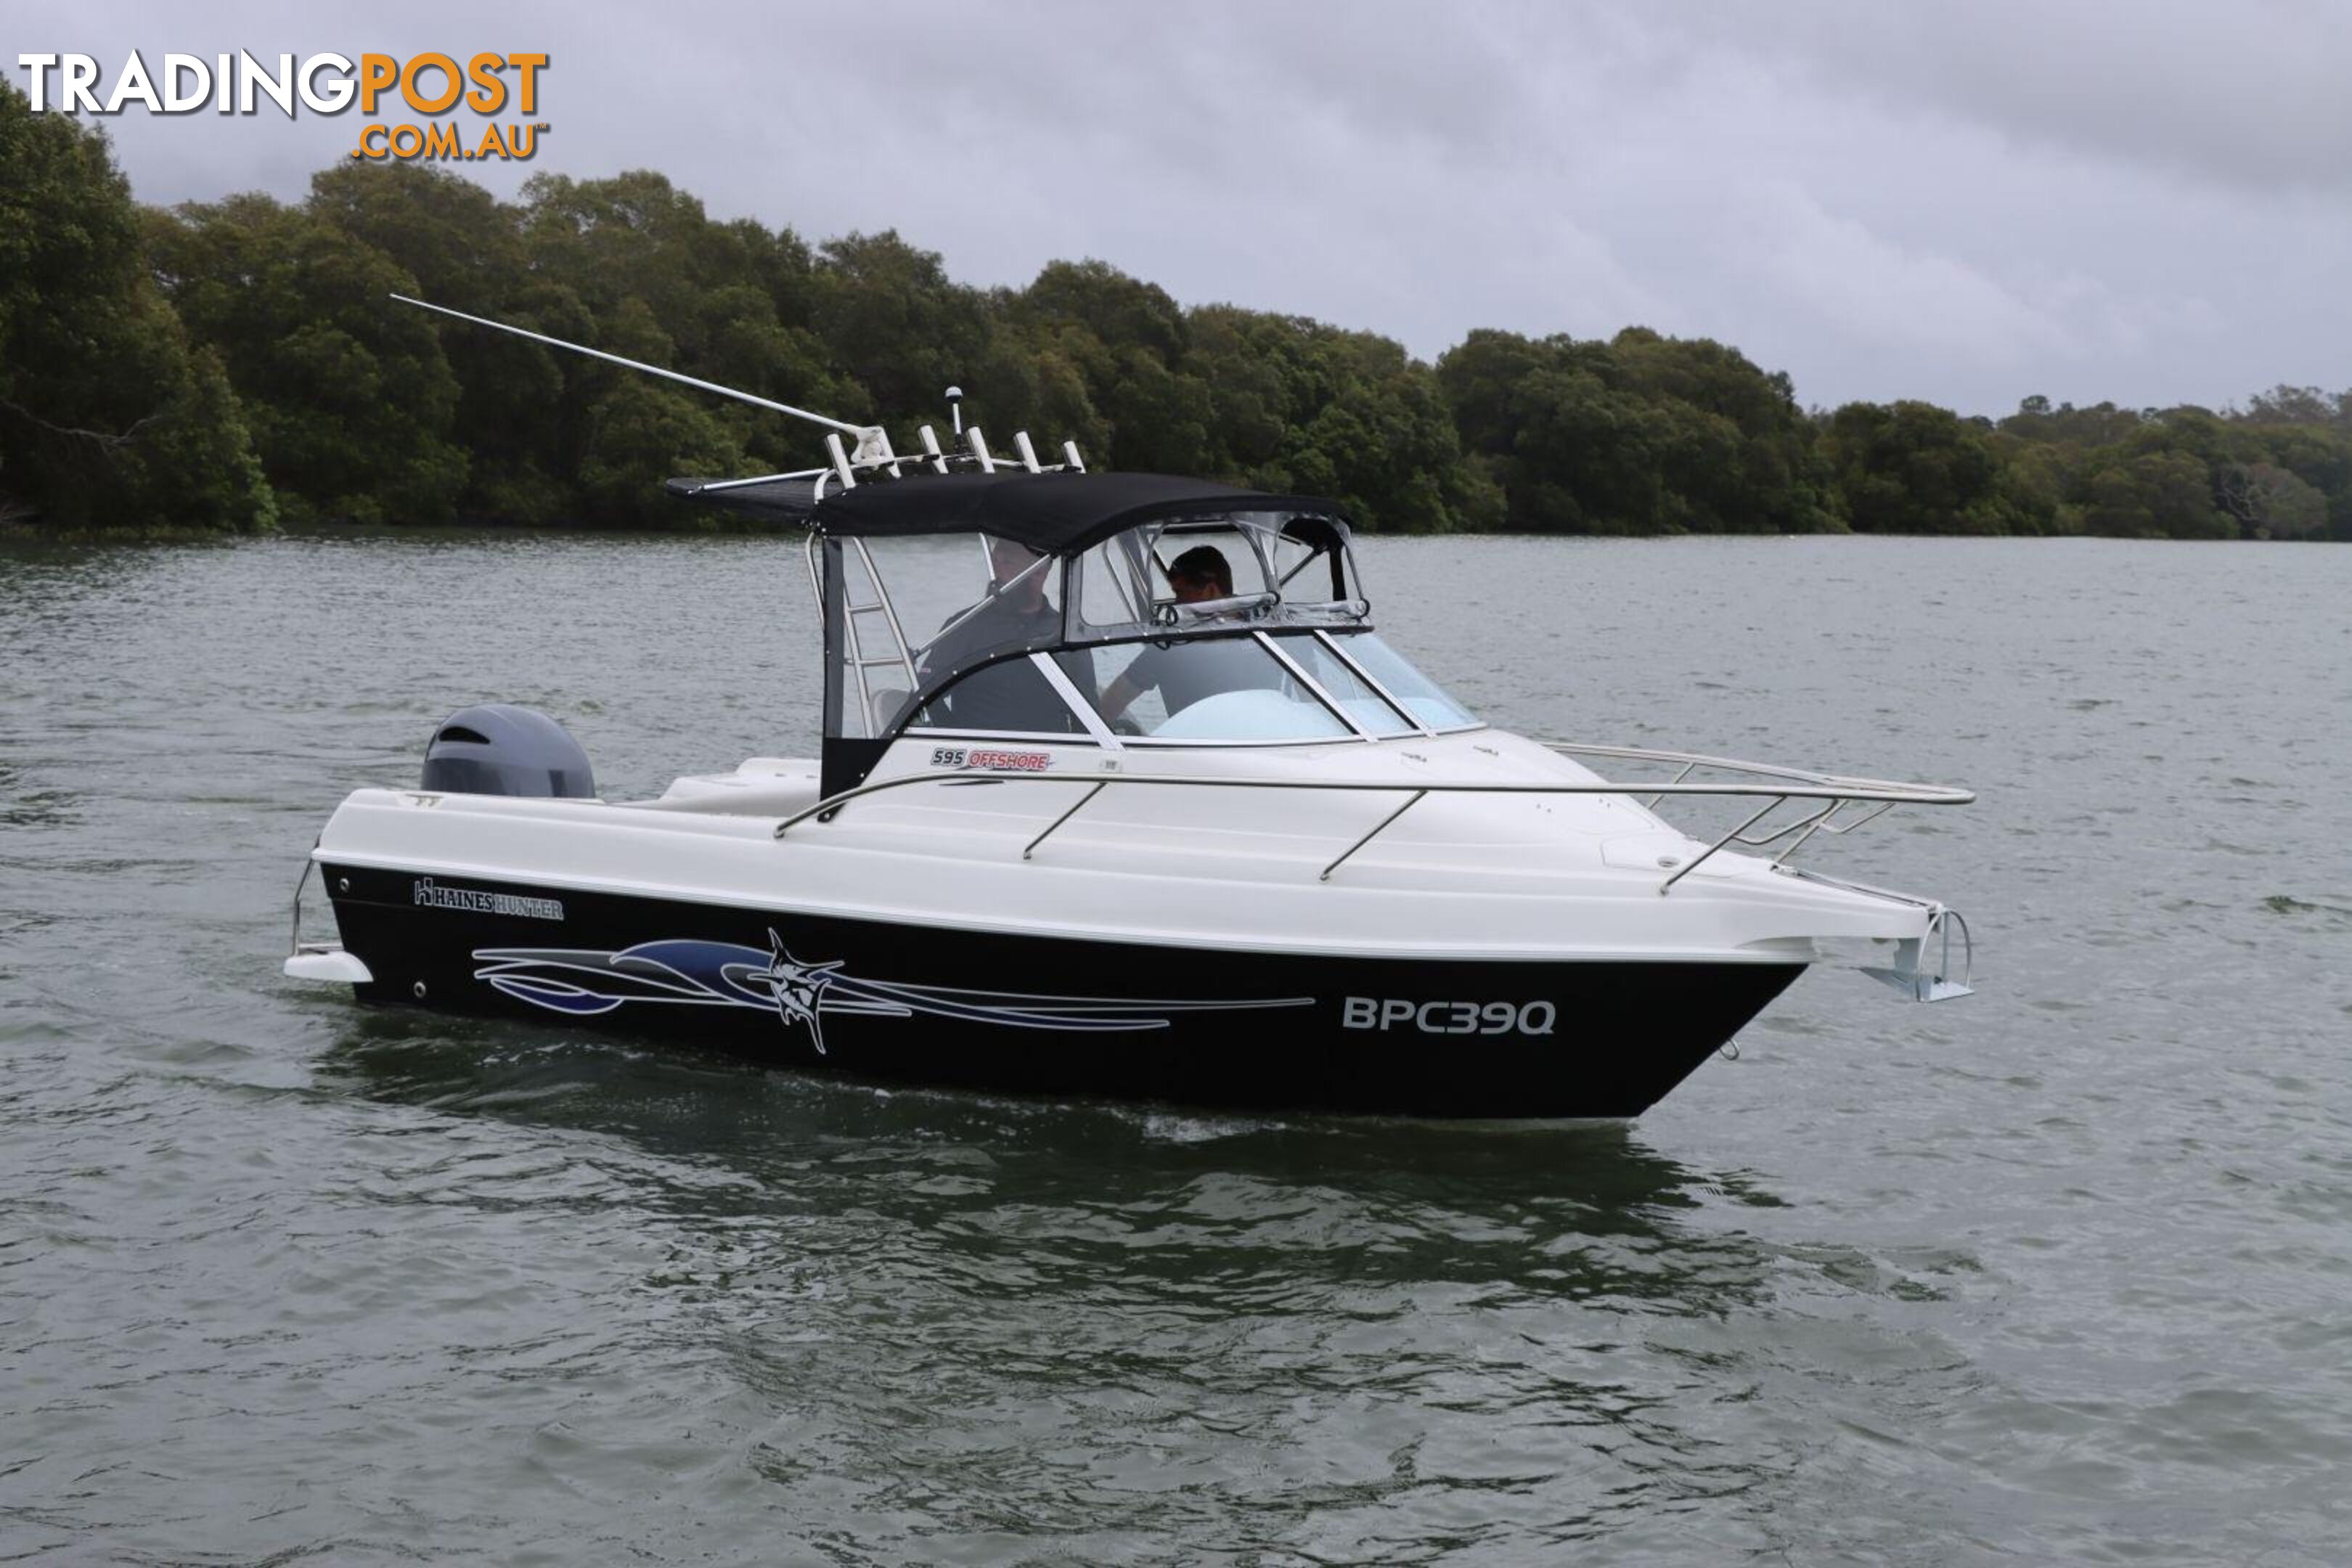 Haines Hunter 595 Offshore + Yamaha F175hp 4-Stroke - Pack 3 for sale online prices